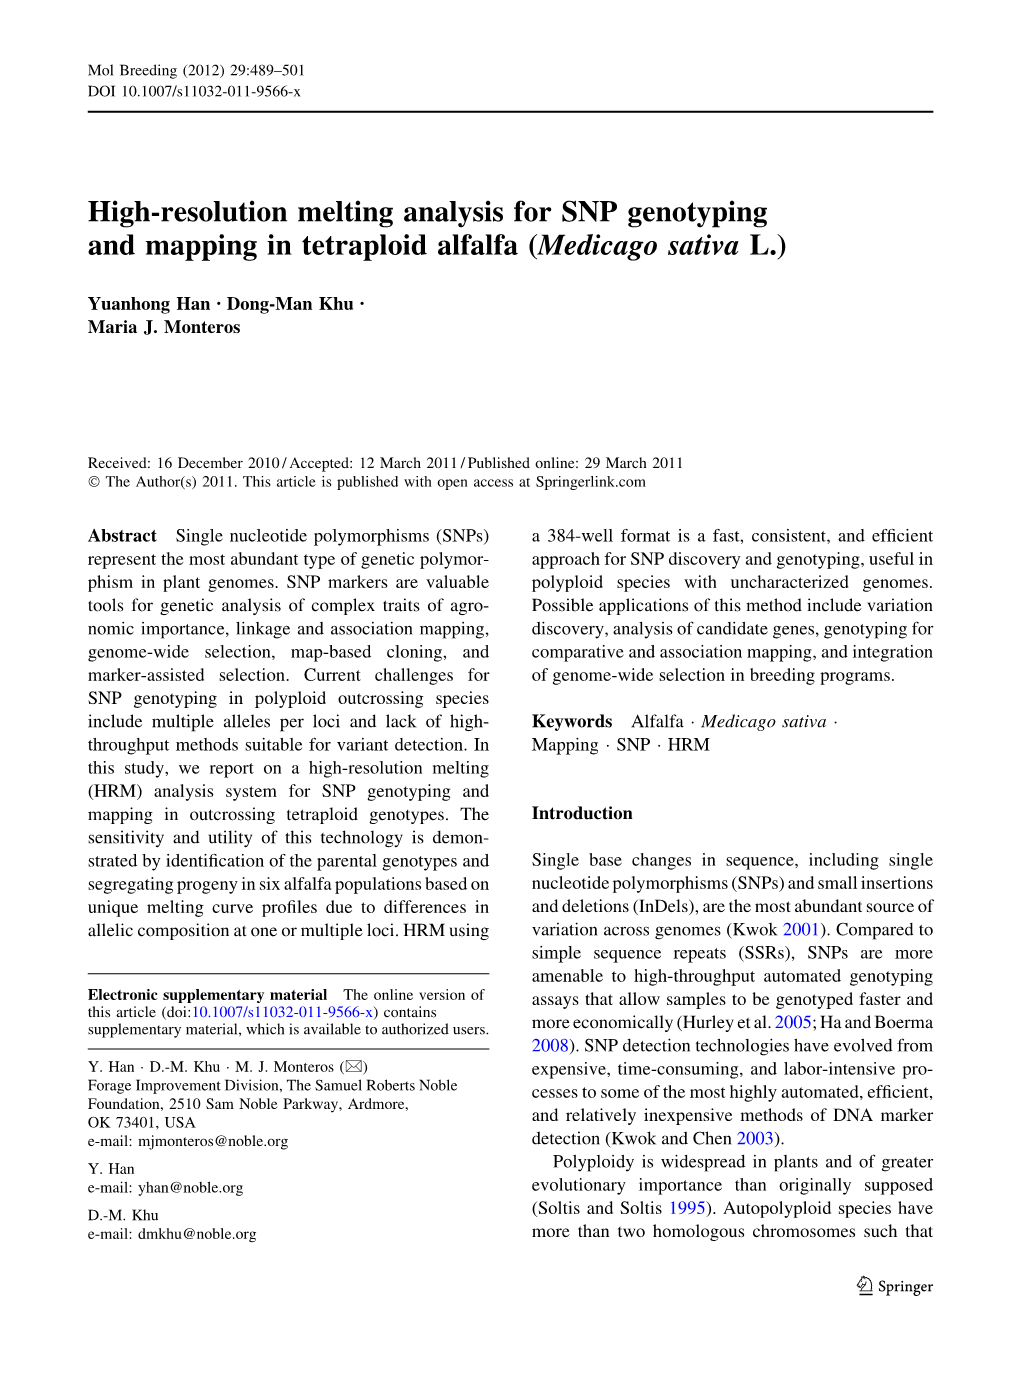 High-Resolution Melting Analysis for SNP Genotyping and Mapping in Tetraploid Alfalfa (Medicago Sativa L.)